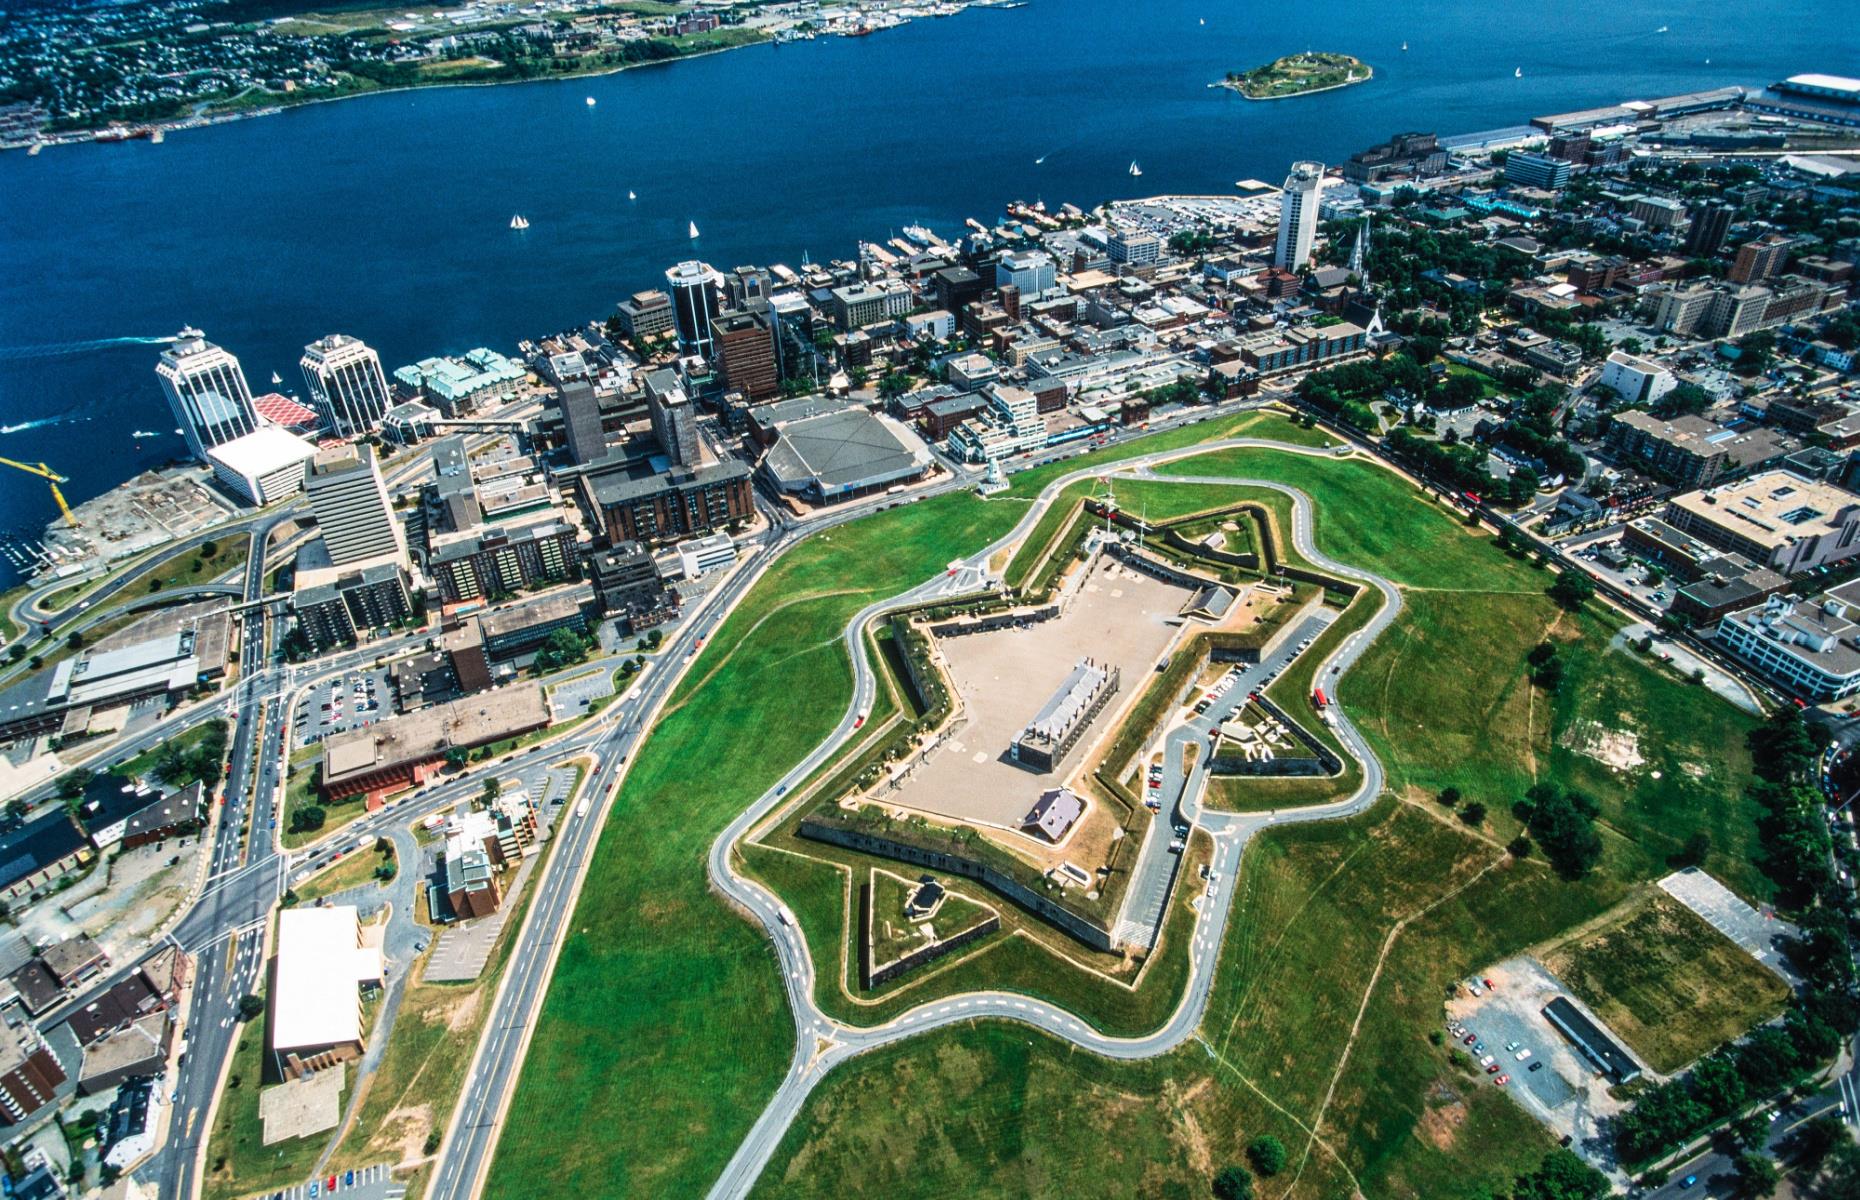 <p>Boasting a blend of historic buildings, like those at the <a href="https://www.pc.gc.ca/en/lhn-nhs/ns/halifax">Halifax Citadel</a> that date back to 1749, and natural coastal beauty, Halifax is a monument to the friendly East Coast spirit. The <a href="https://www.novascotia.com/trip-ideas/stories/halifax-waterfront-day">downtown waterfront</a> features 2.5 miles (4km) of wooden boardwalk, offering views of passing boats and plenty of restaurants serving sumptuous local seafood. Get on the water and paddle out into the harbor to get the best view of the city’s sparkling skyline.</p>